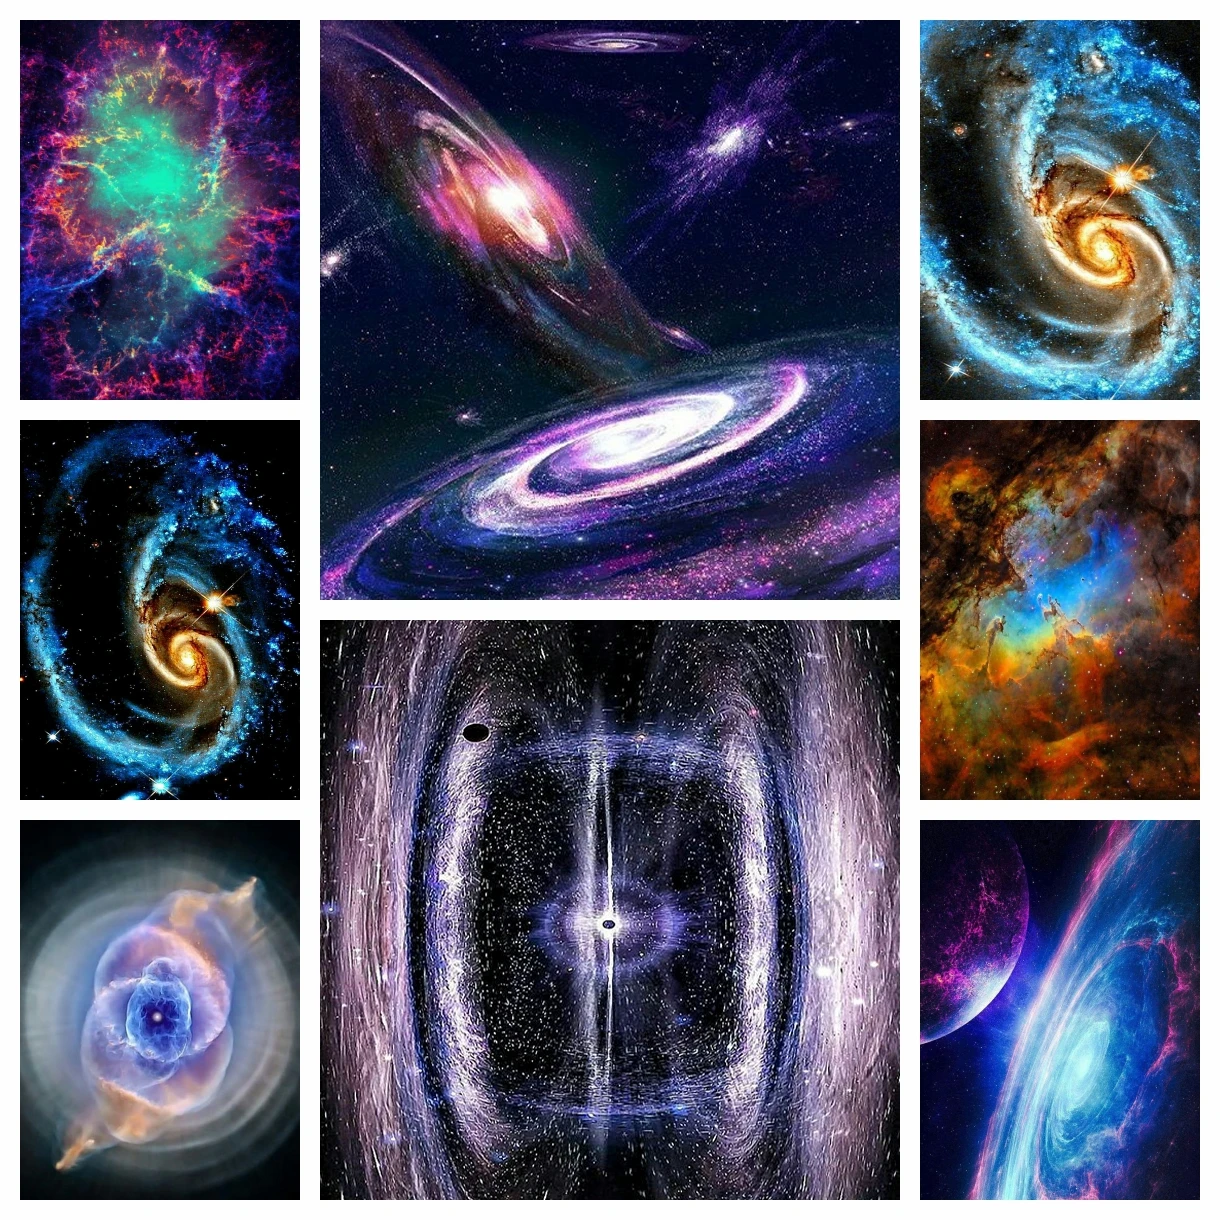 Space Galaxy View Poster 5D Diamond Painting M42 Great Orion Nebula Picture Full Drill Mosaic Embroidery Cross Stitch Kits Home